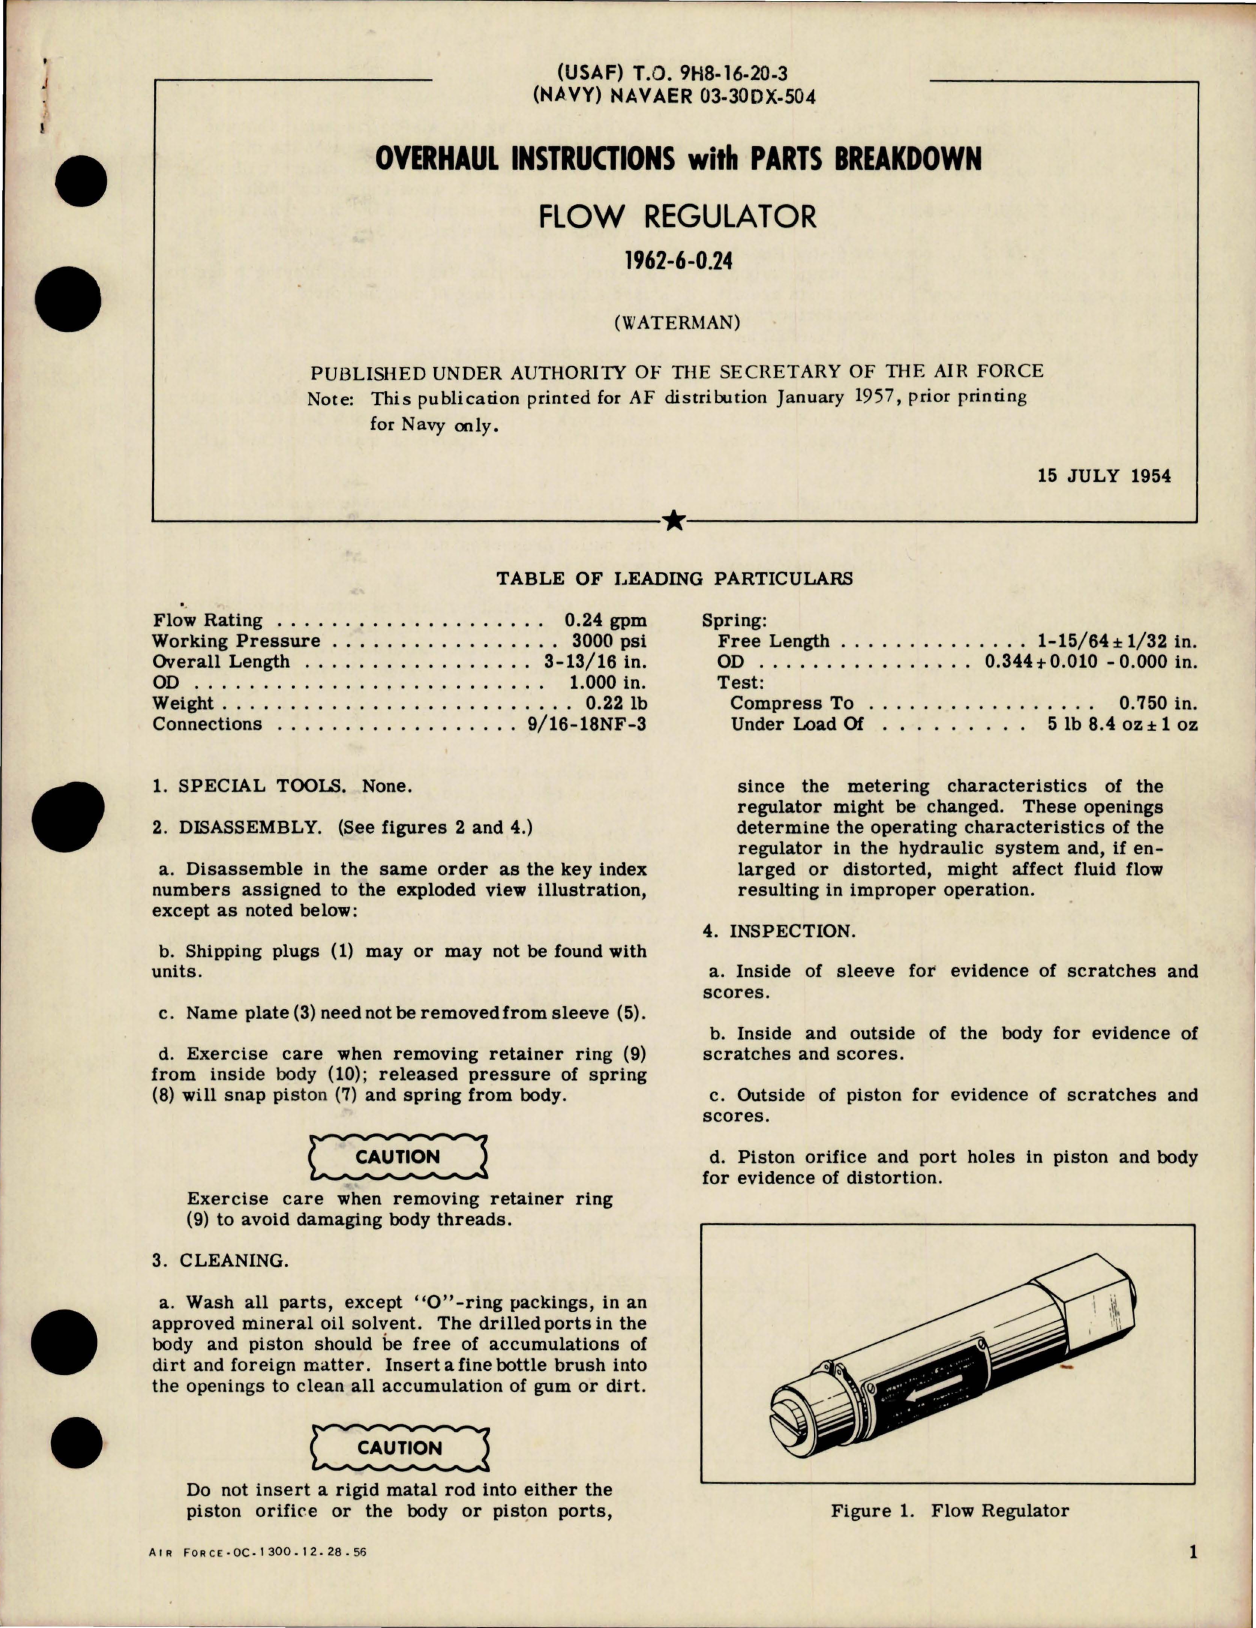 Sample page 1 from AirCorps Library document: Overhaul Instructions w Parts for Flow Regulator - 1962-6-0.24 